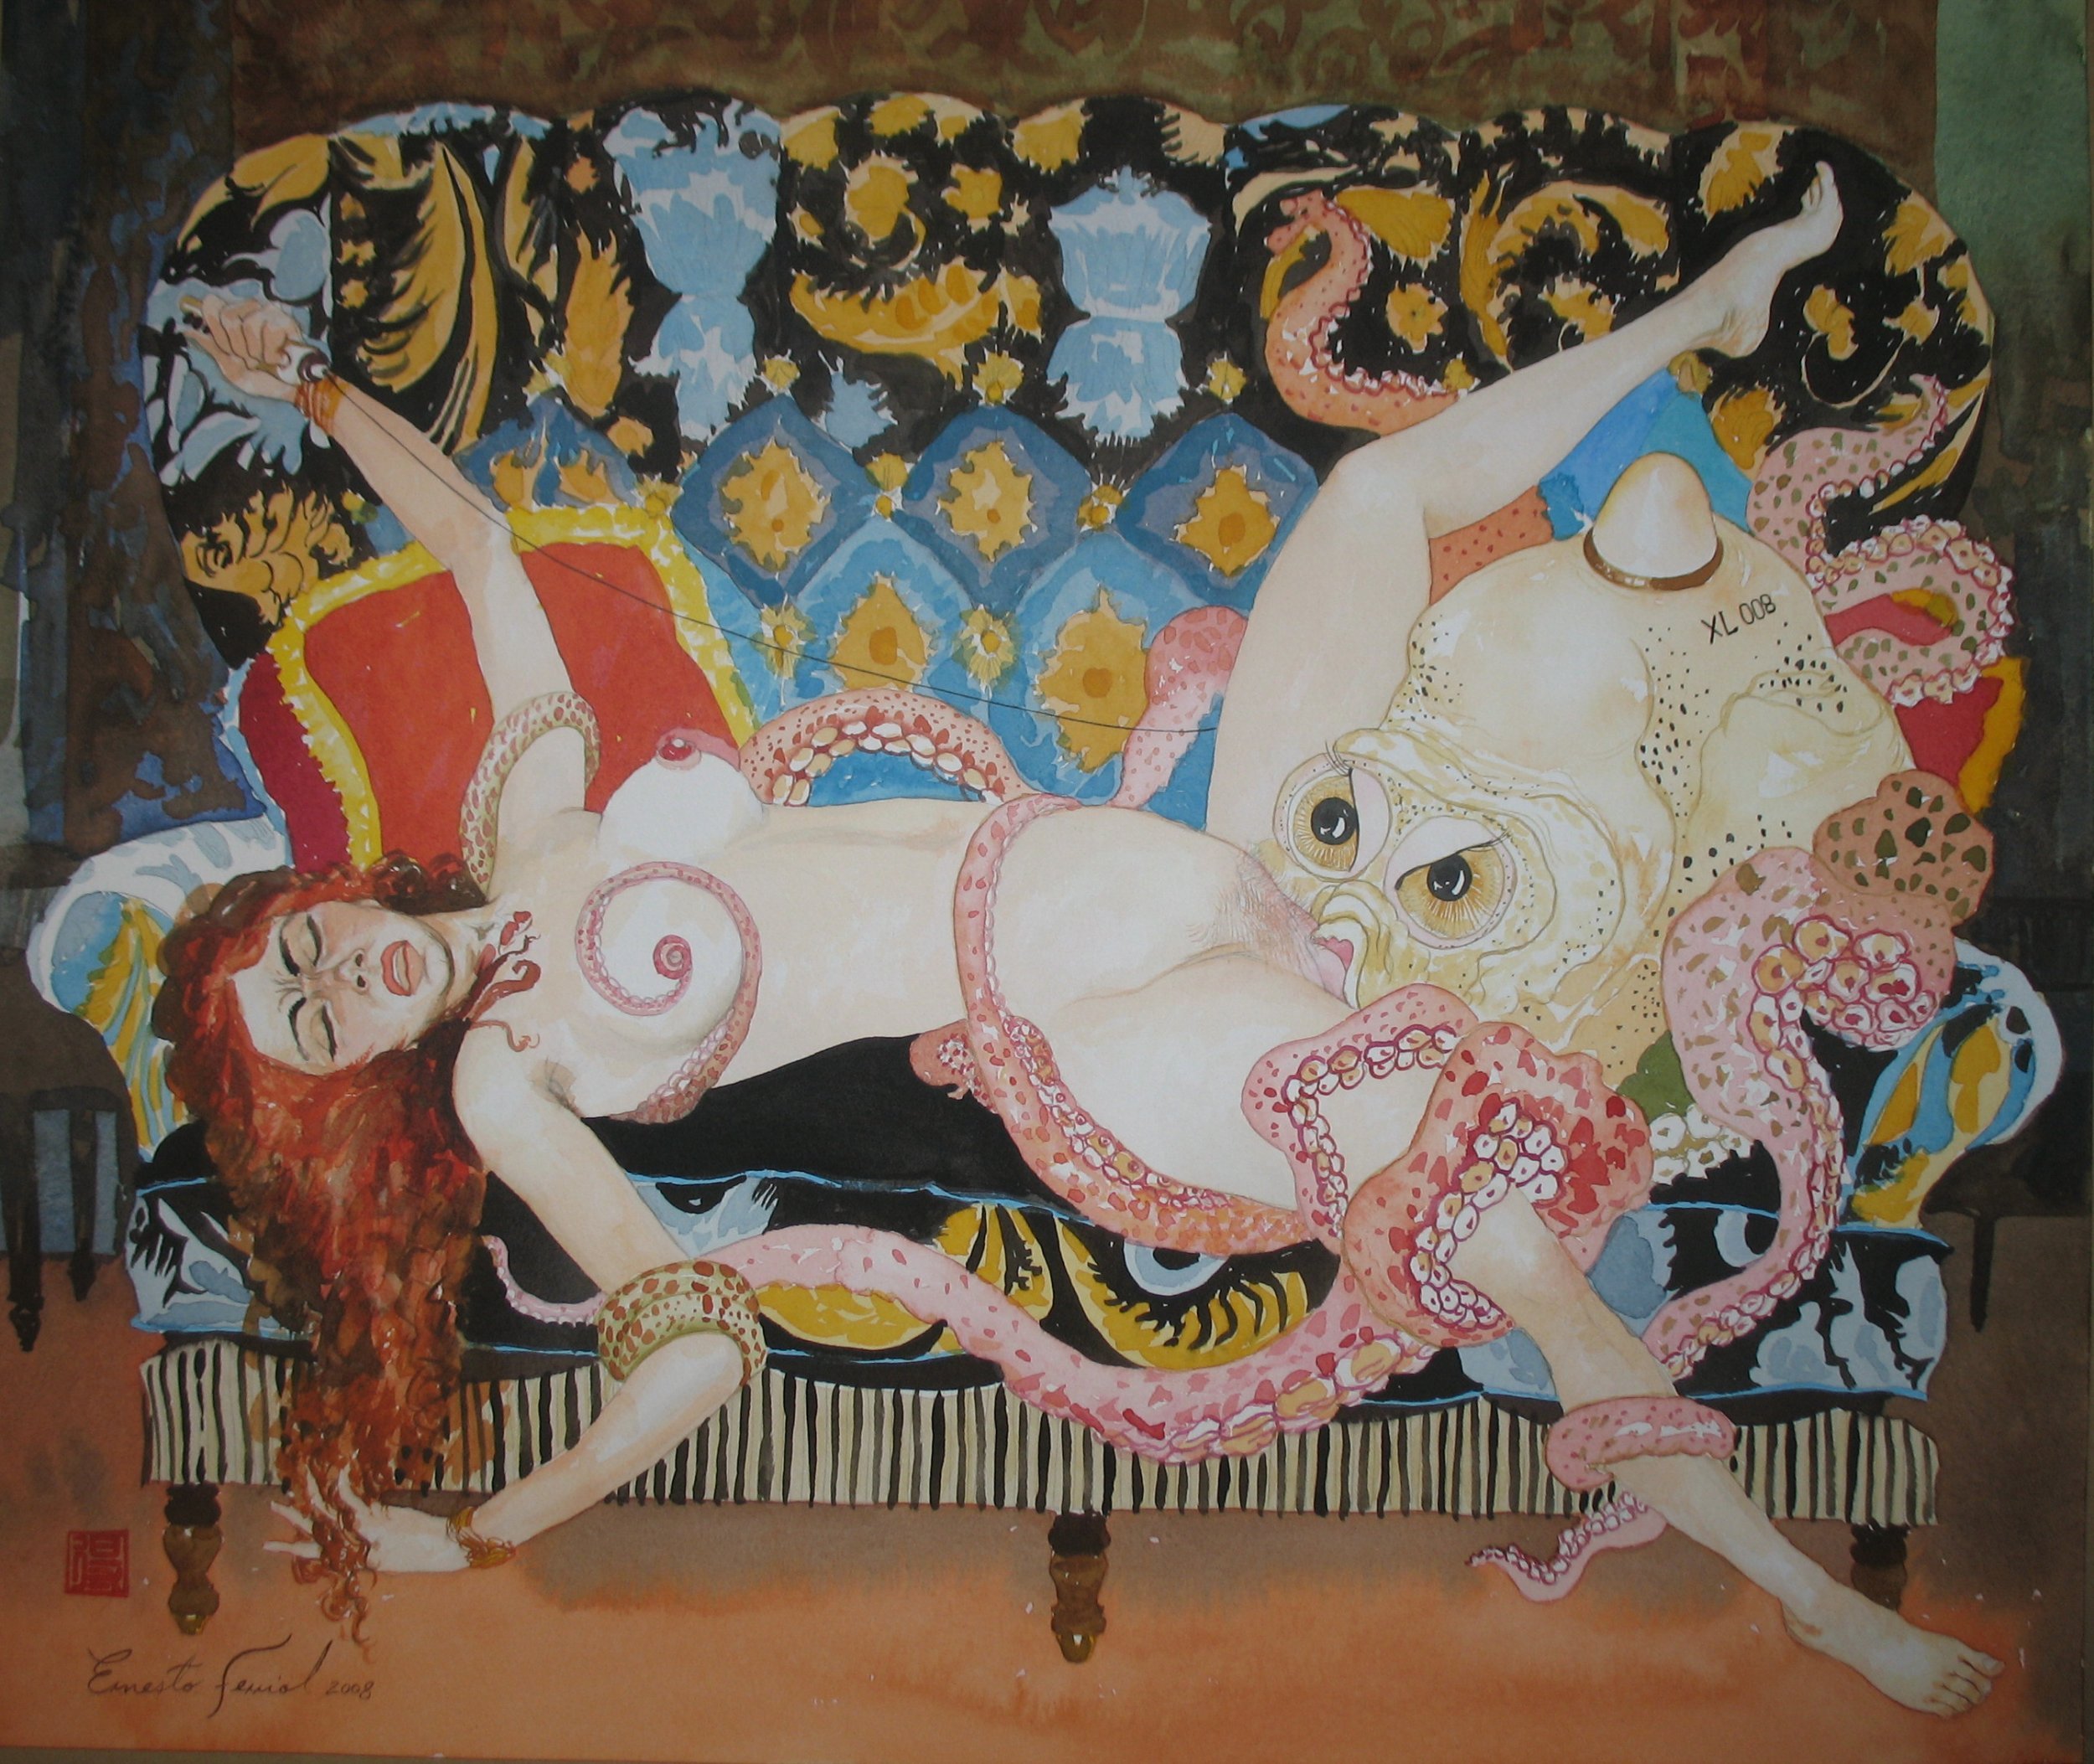 angry octopus with nude female on sofa by Ernesto Jorge Ferriol Perez